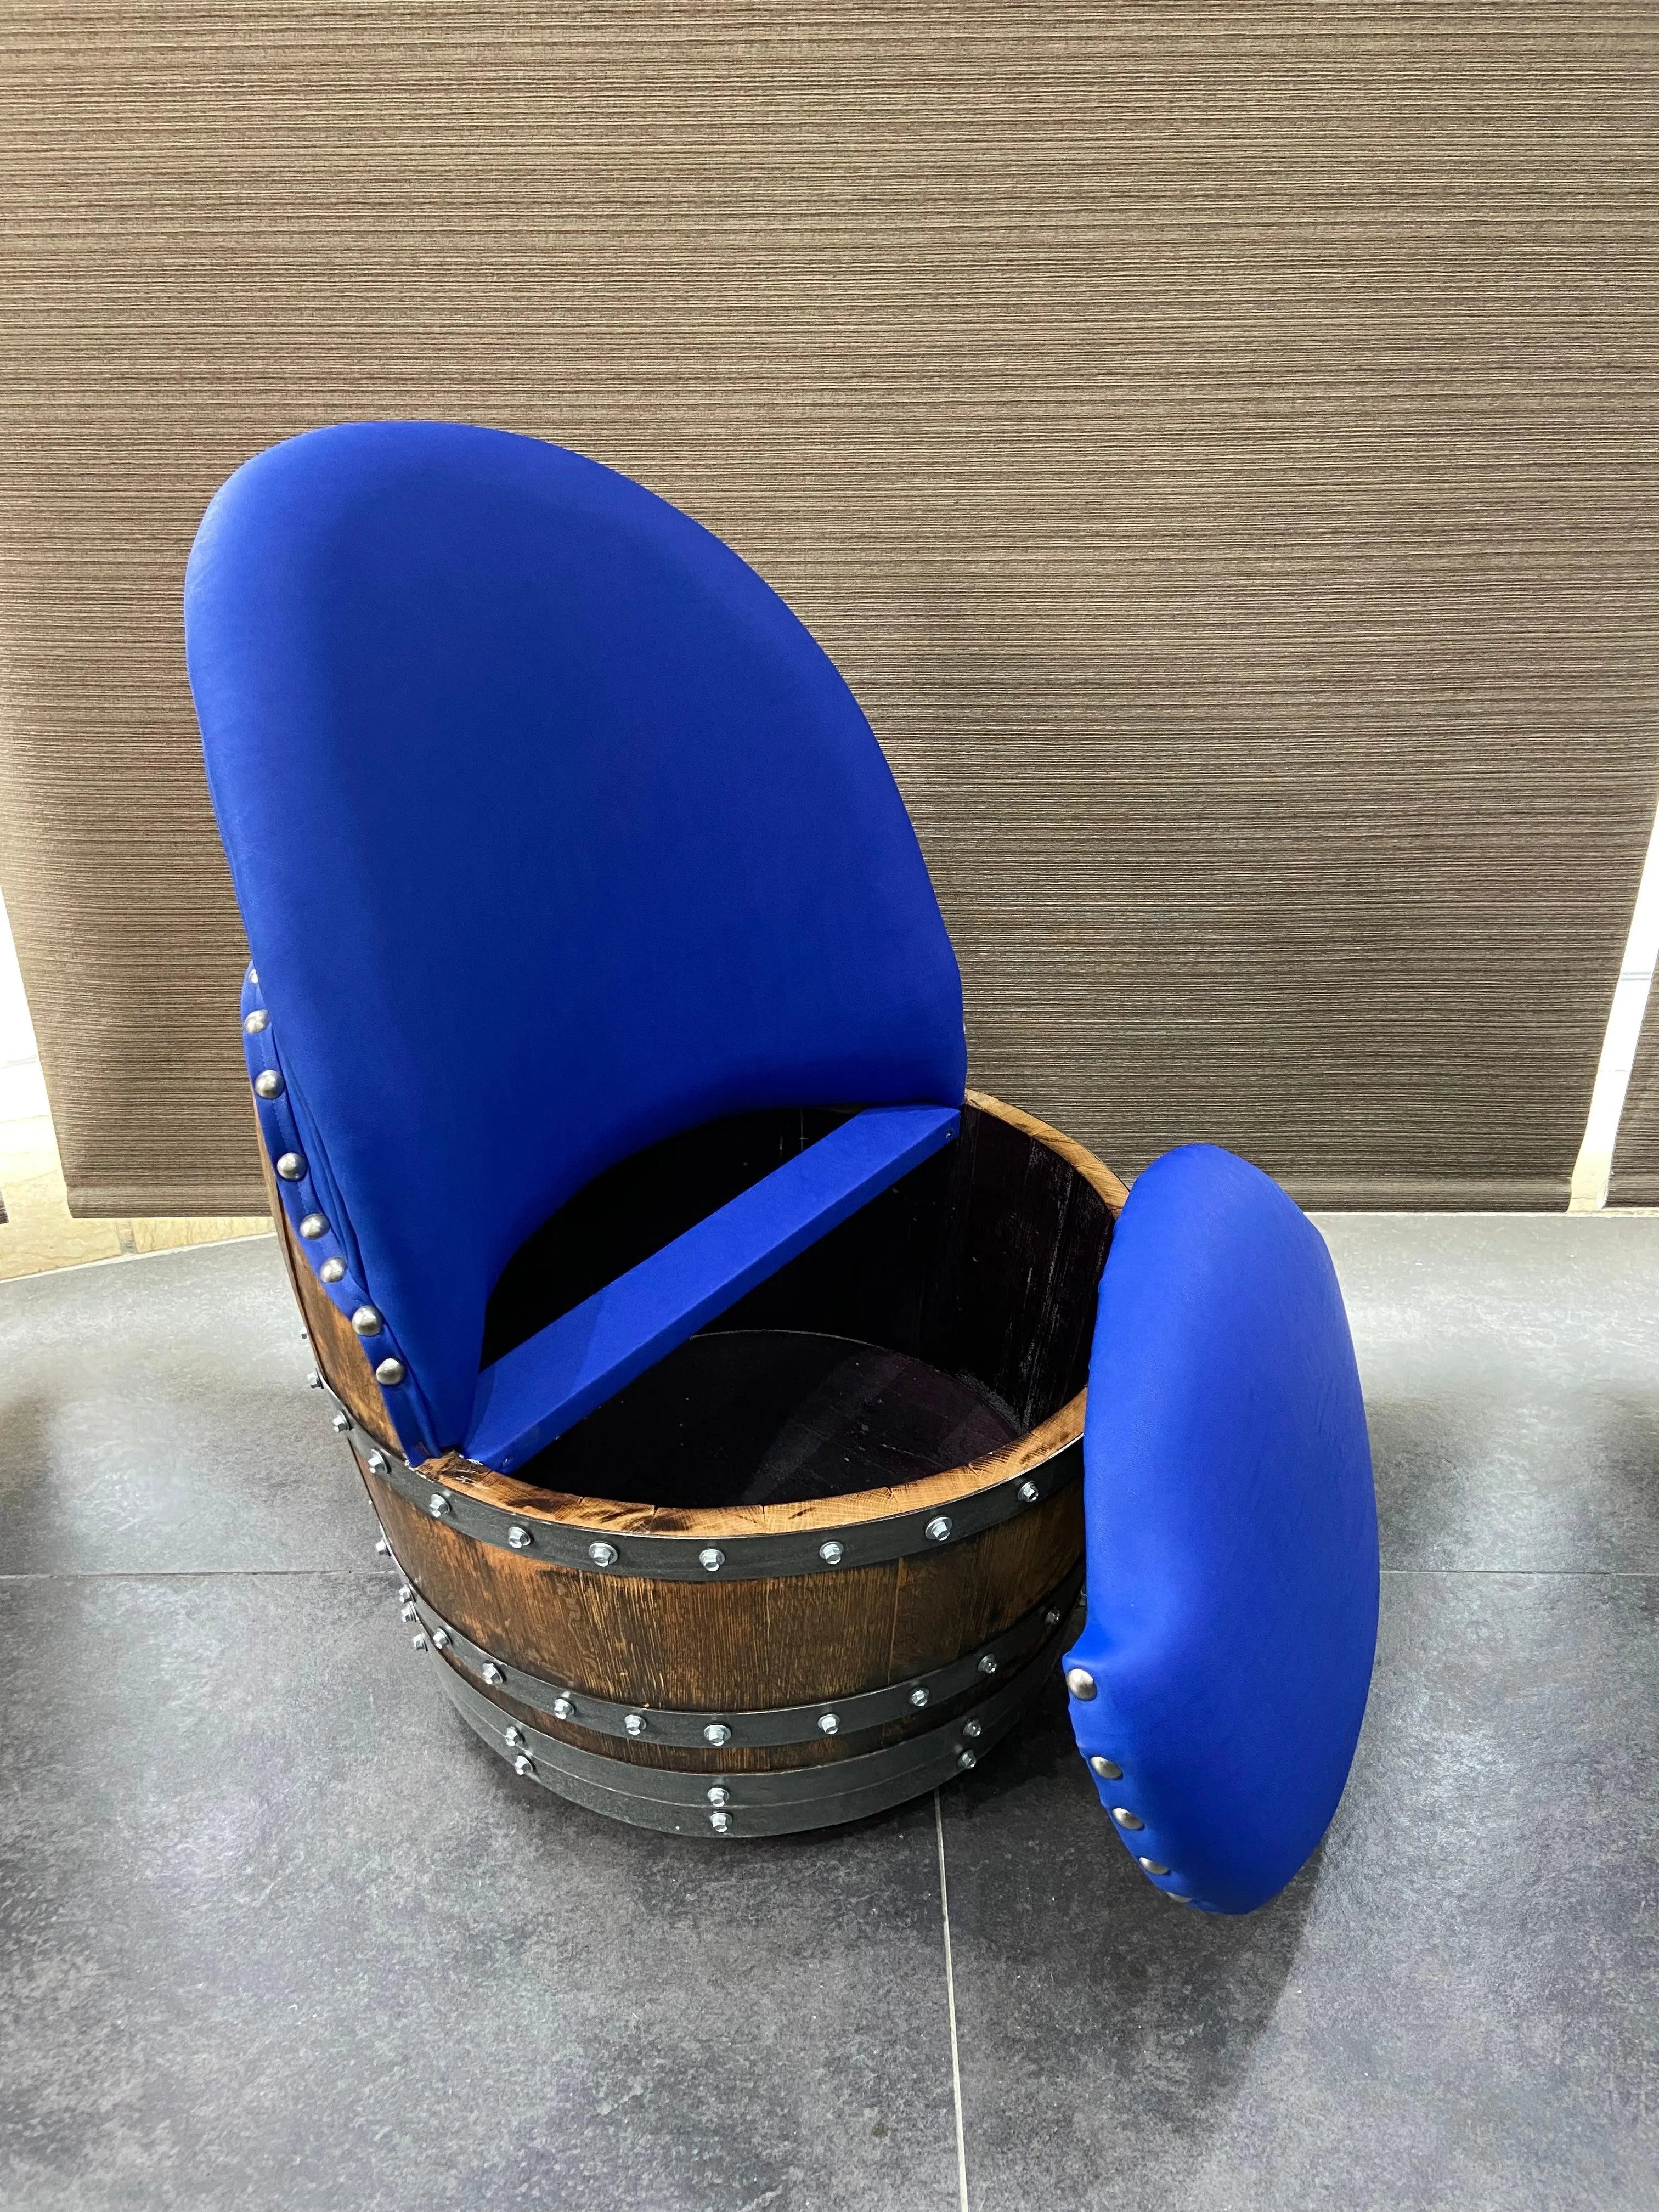 Wine Barrel Chair Sea Blue (Limited Colorway) - Oak Wood Wine Barrels. wine barrel coffee table barrel glass top wine barrel glass top whiskey barrel glass top bourbon barrel glass top barrel coffee table barrel wine rack wine barrel table whiskey barrel whiskey barrel table wine barrel handma